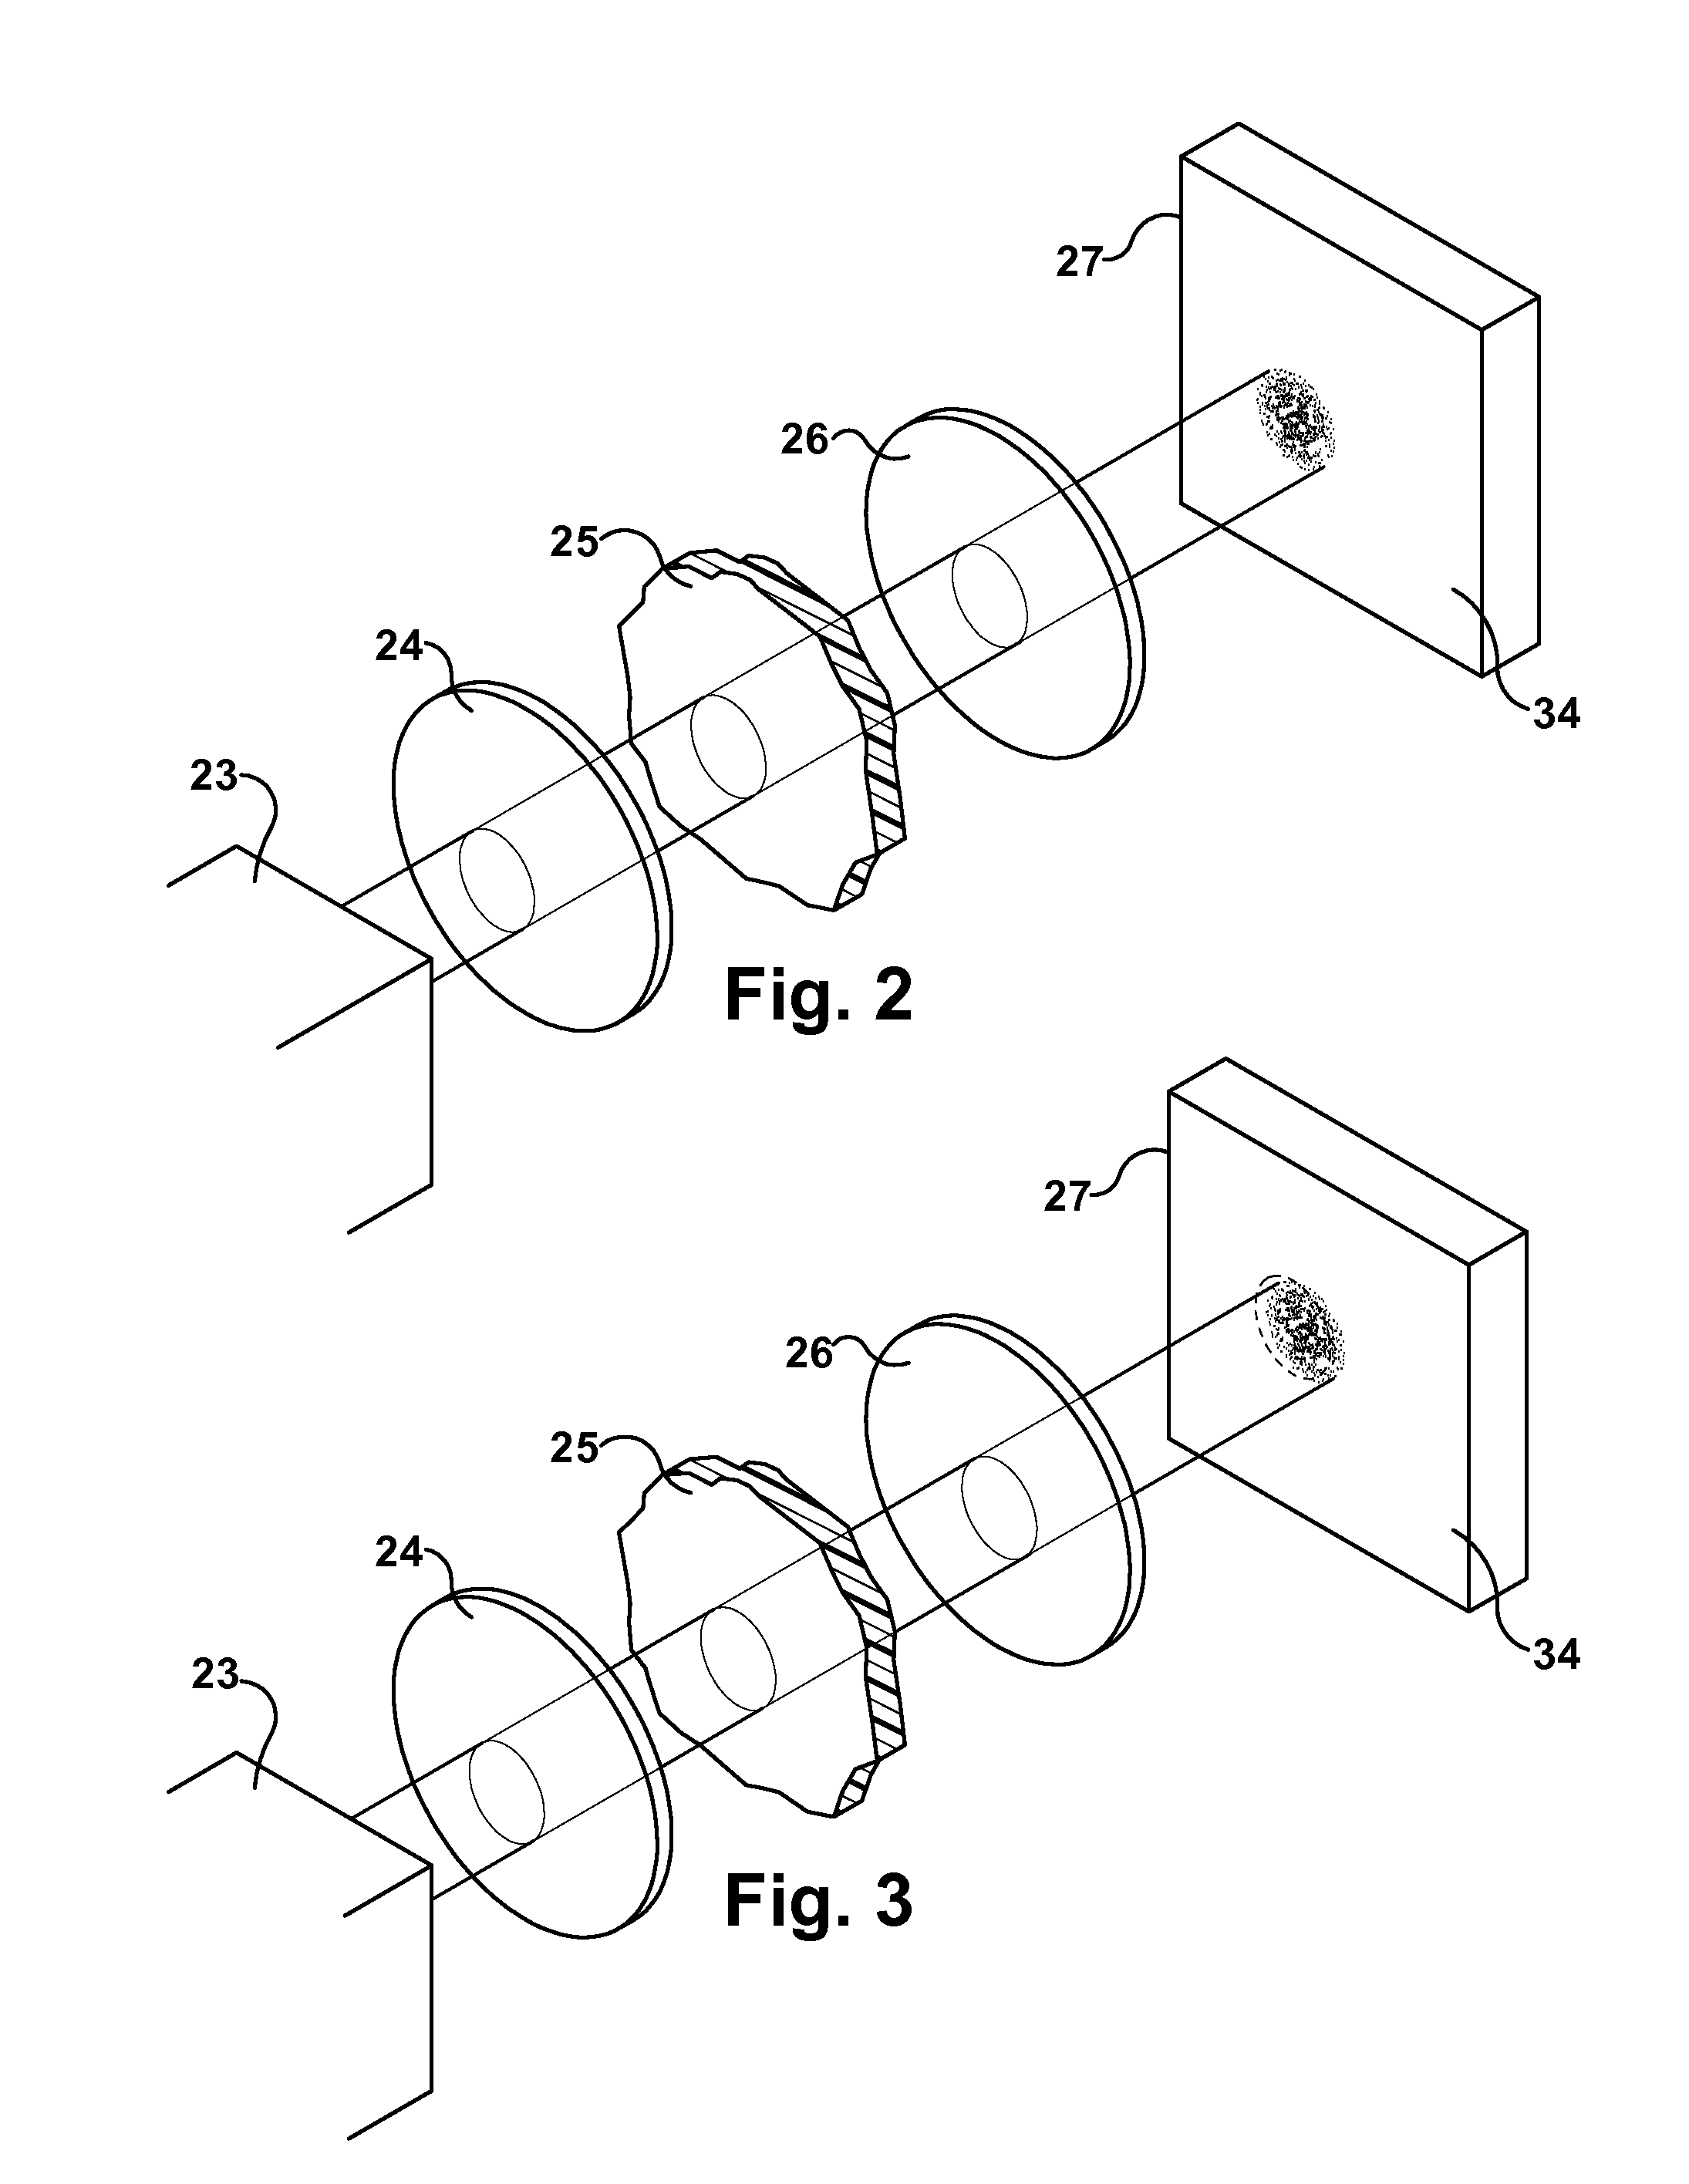 Light diffuser used in a testing apparatus